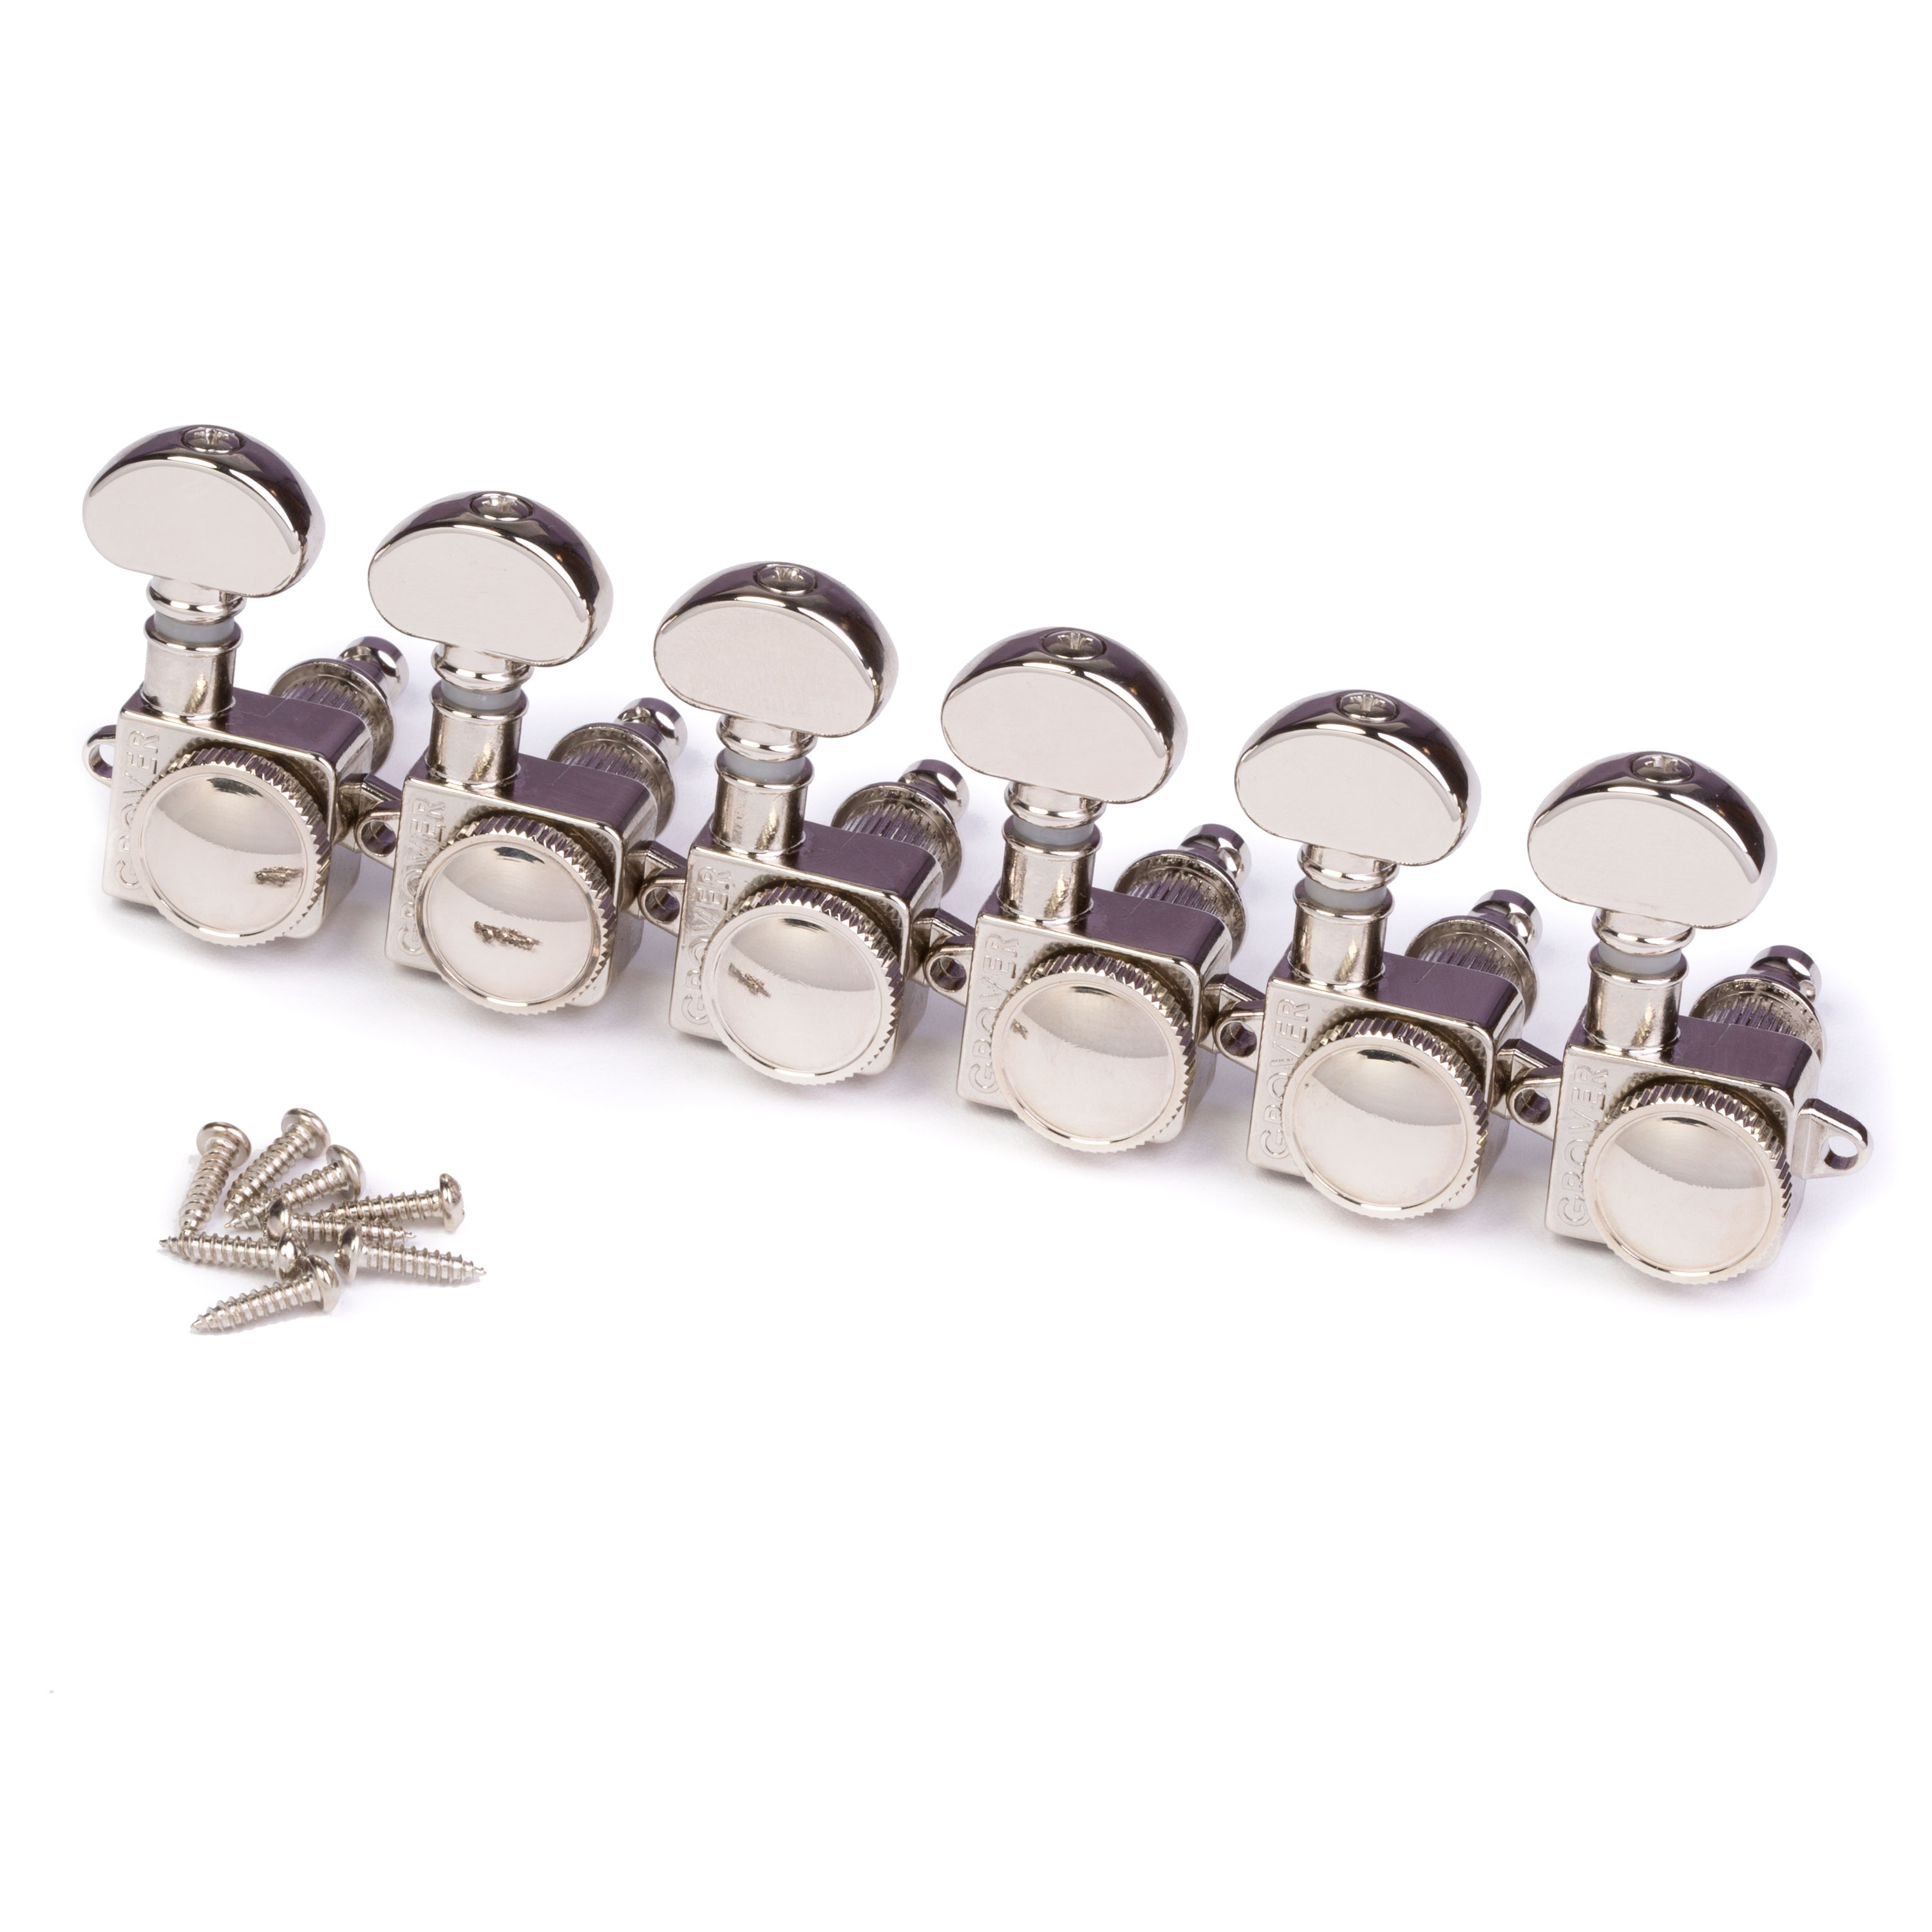 Grover Roto-Grip Locking Rotomatics (505F Series) 6-In-Line Tuners